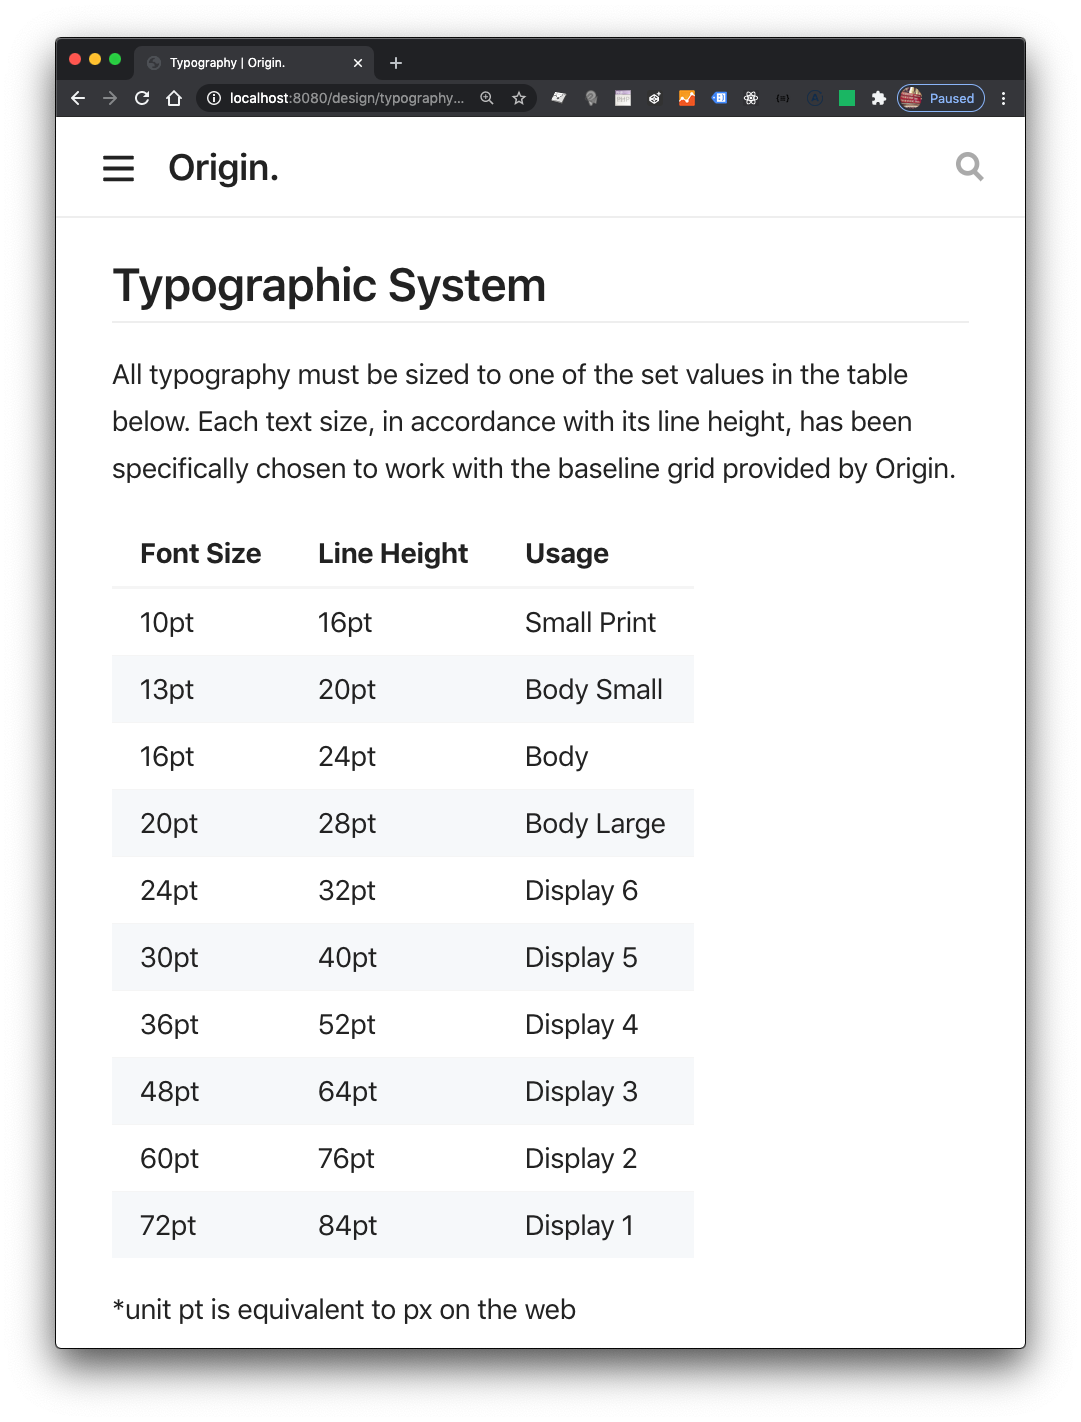 A list of all font-sizes and line-heights used in Origin's Typographic System